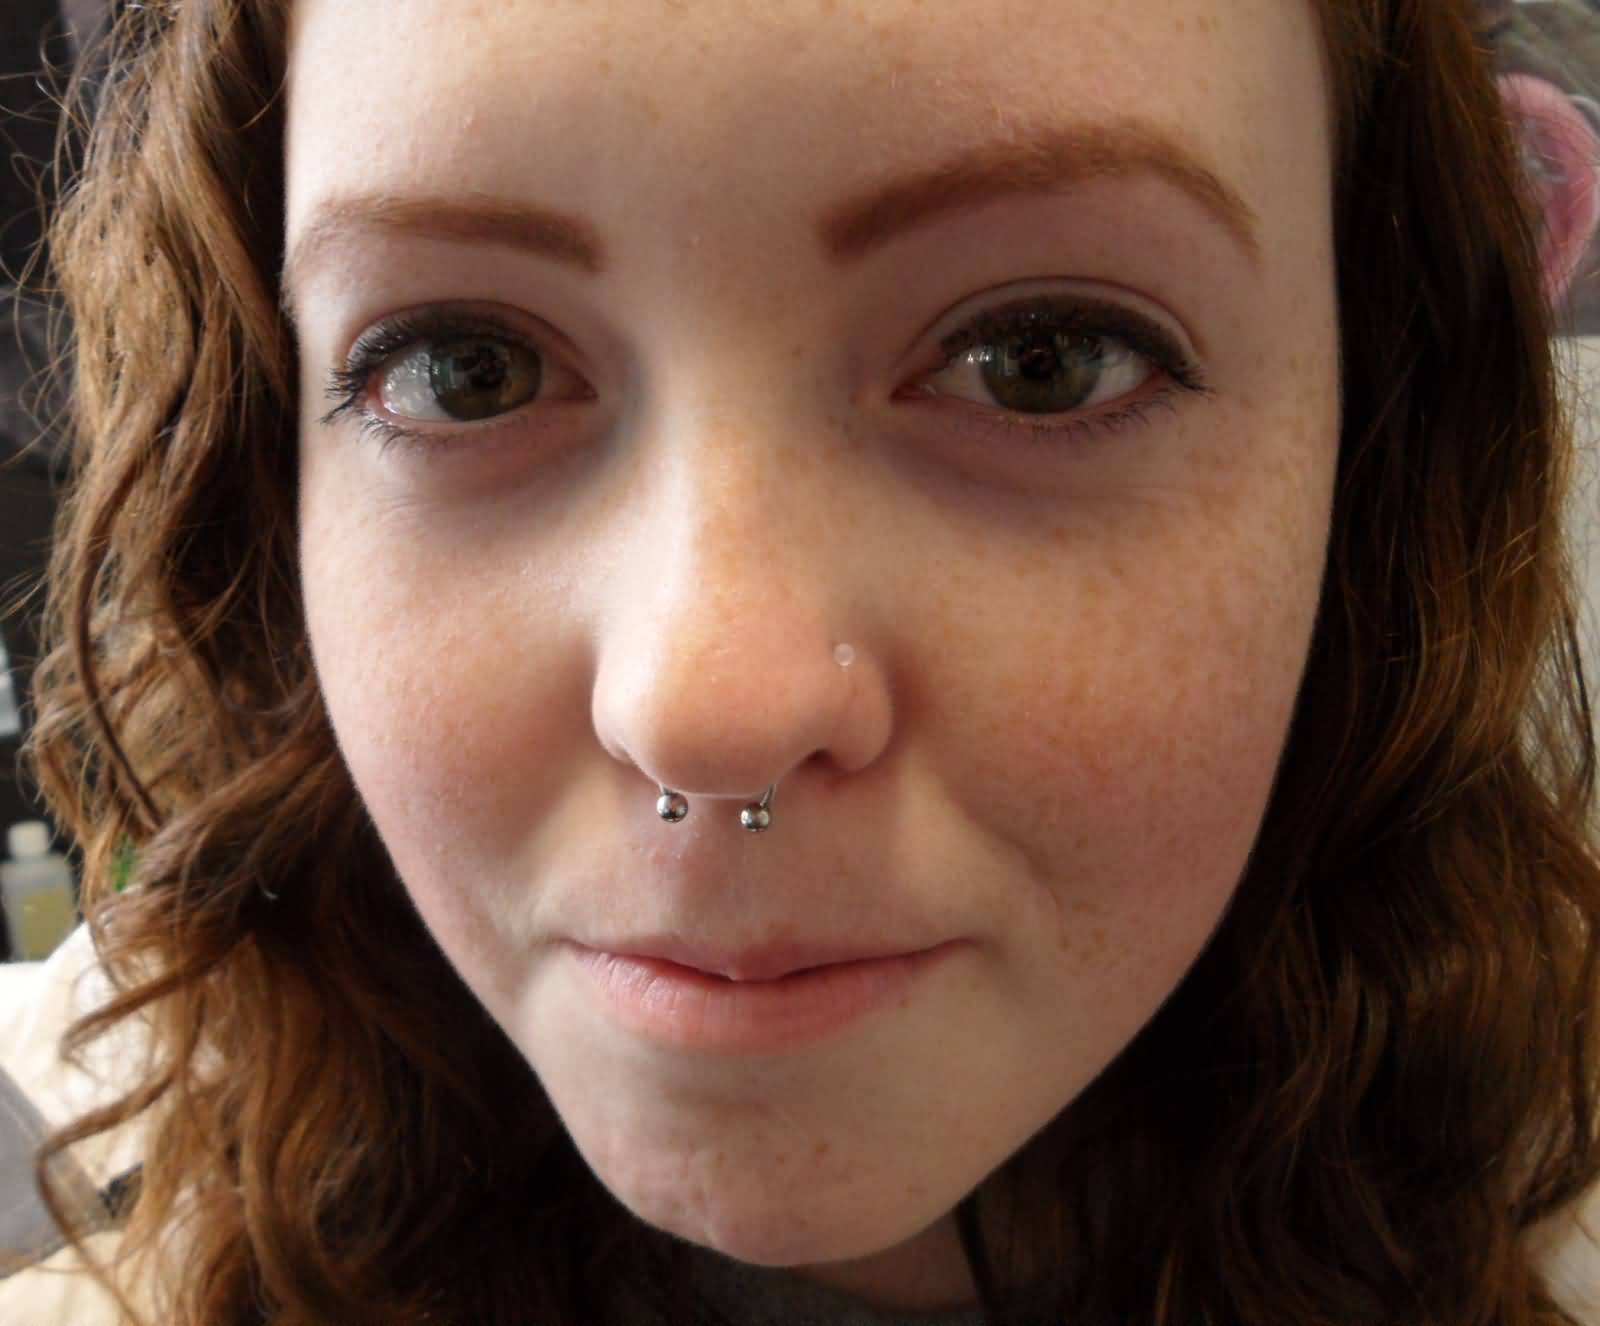 Cool Septum Piercing With Silver Circular Barbell